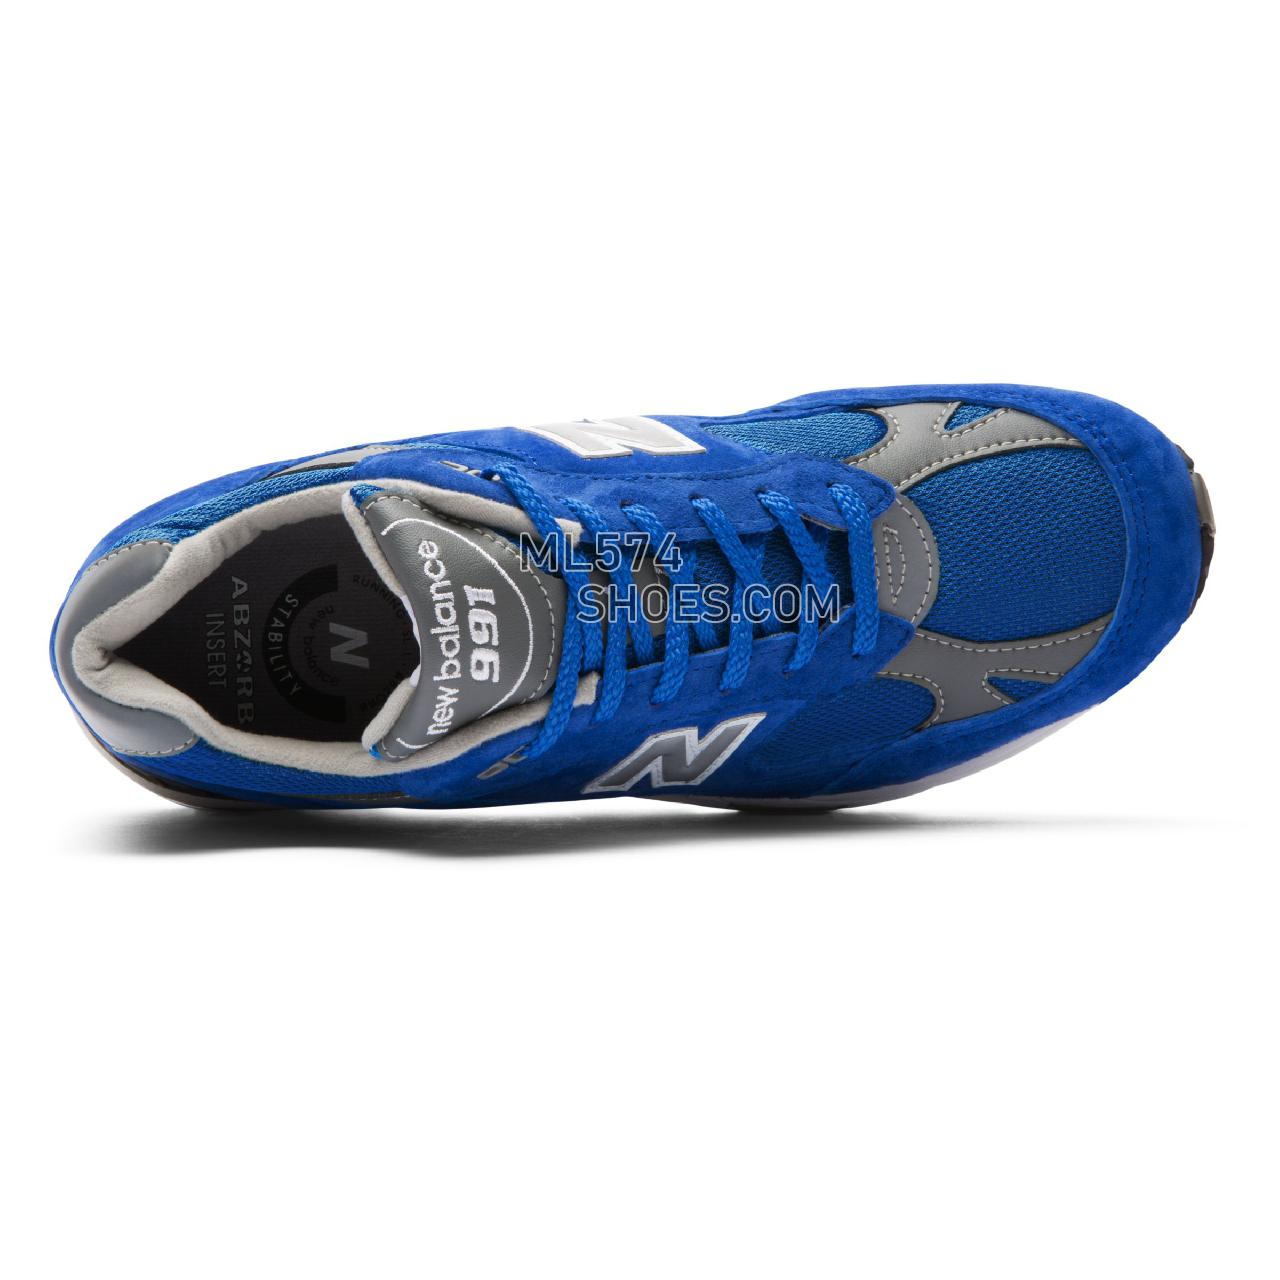 New Balance Made in UK 991 - Men's Made in UK 991 ML991V1-23760-M - Bright Blue with Grey and White - M991BLE